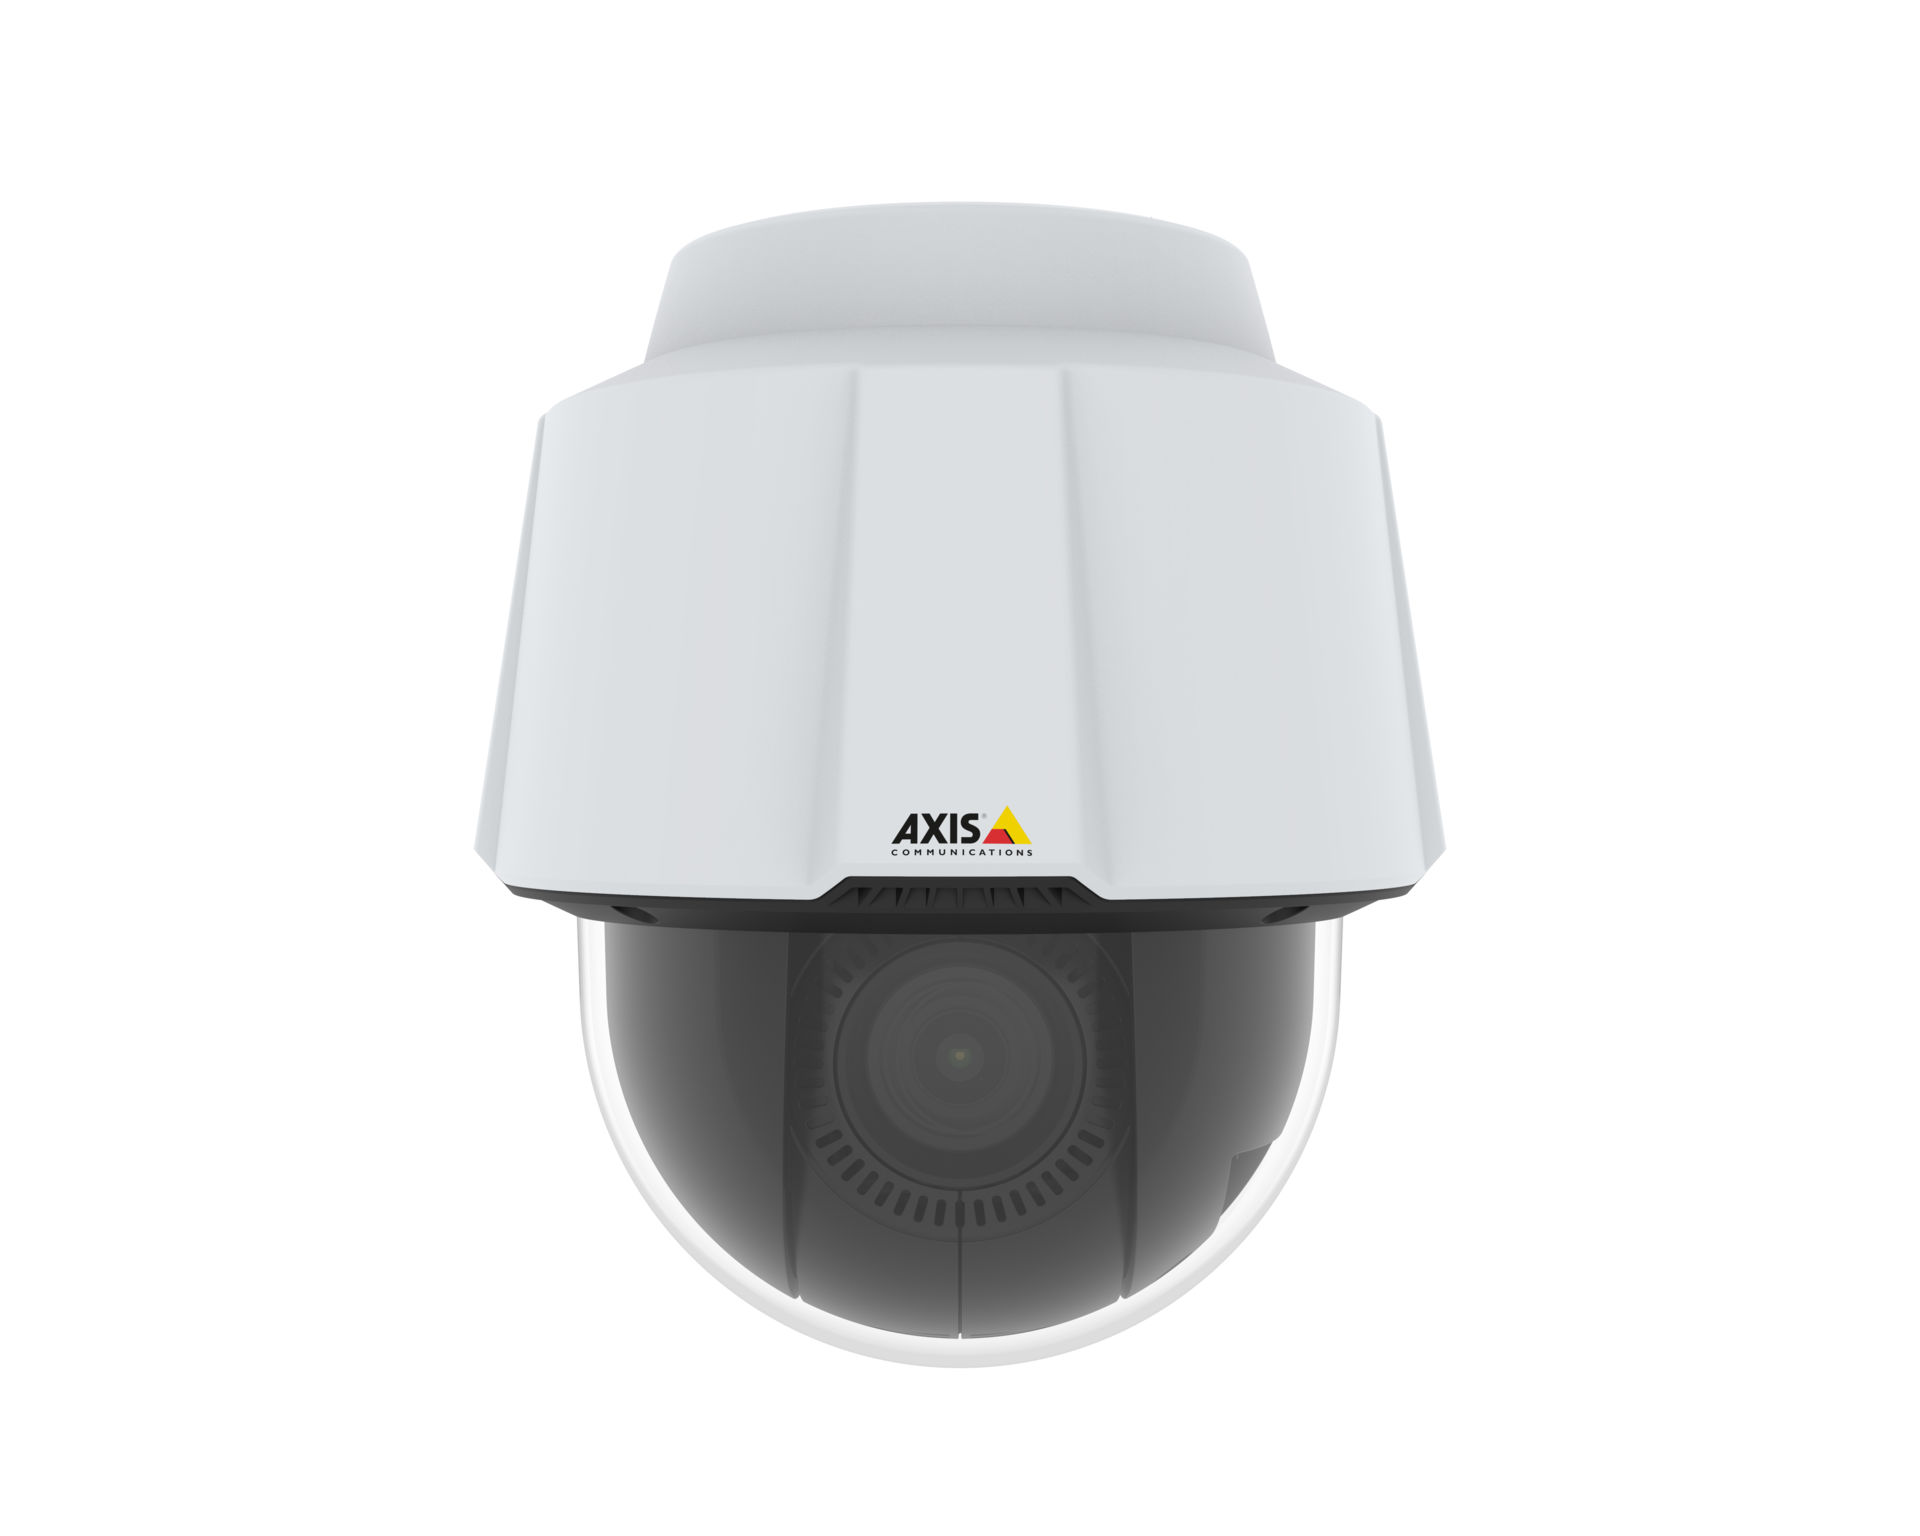 PTZ Cameras - Pan, tilt, and zoom capabilities for wide-area coverage